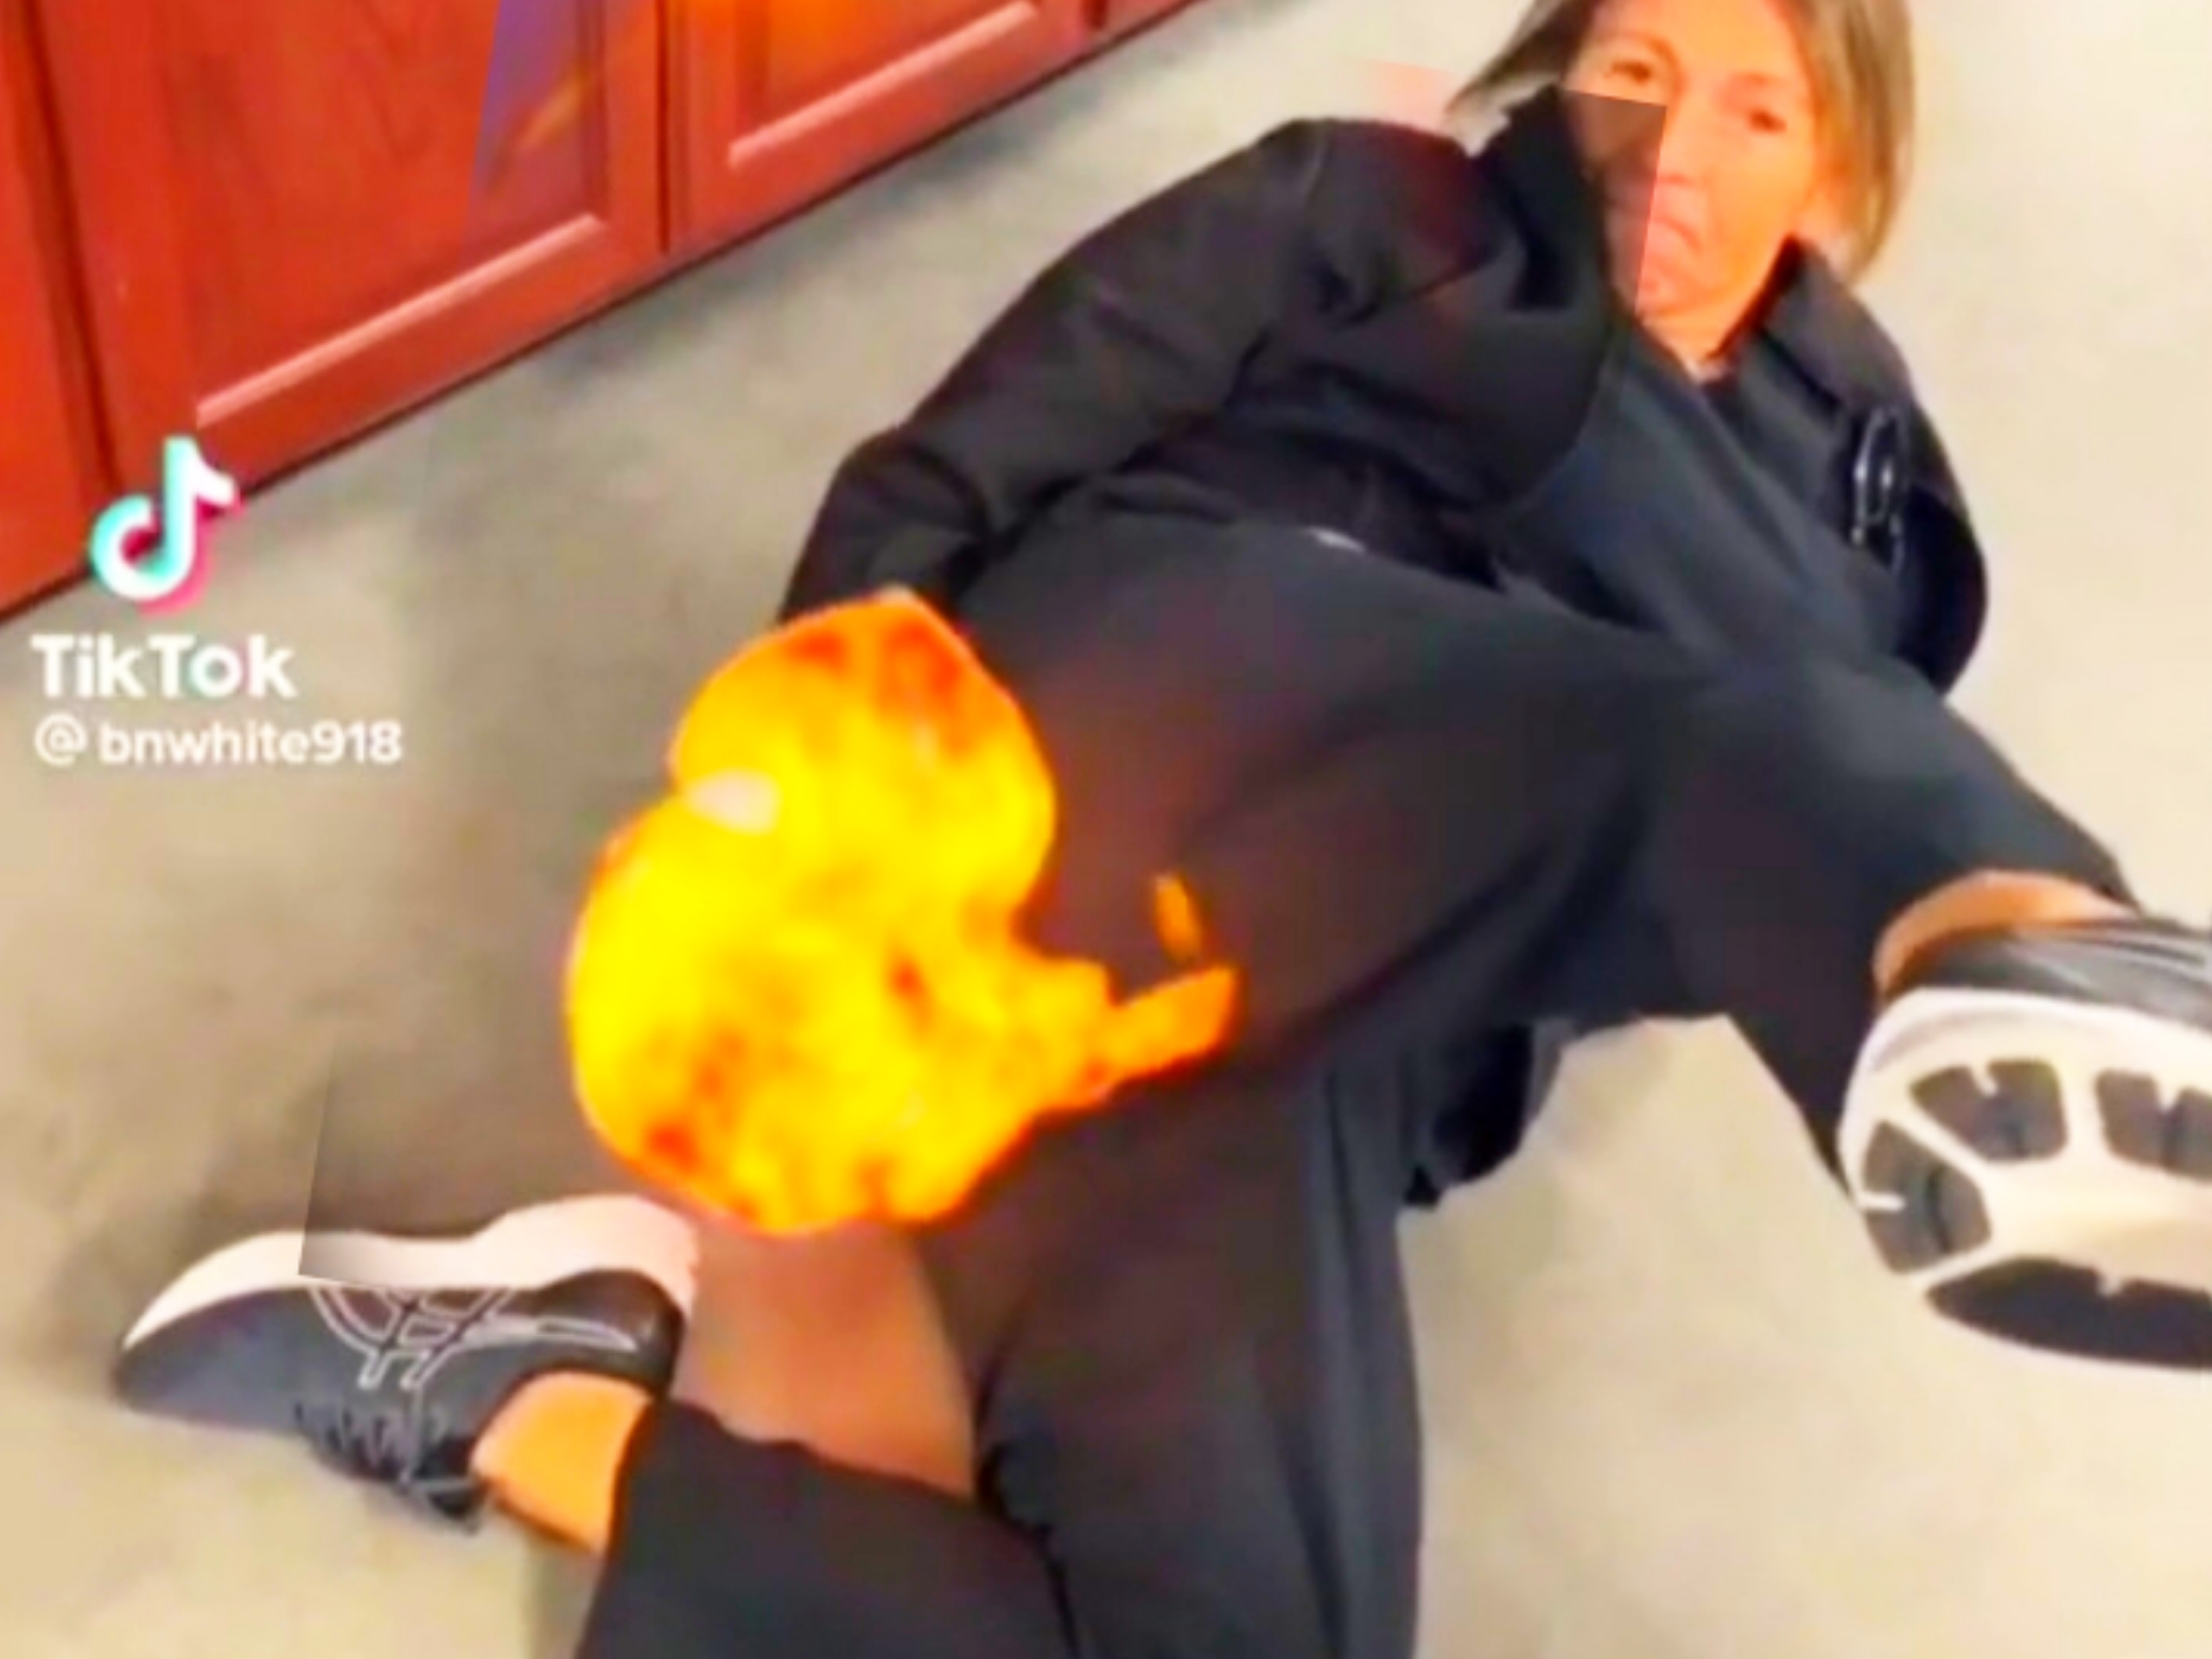 Girls farting on fire compilation